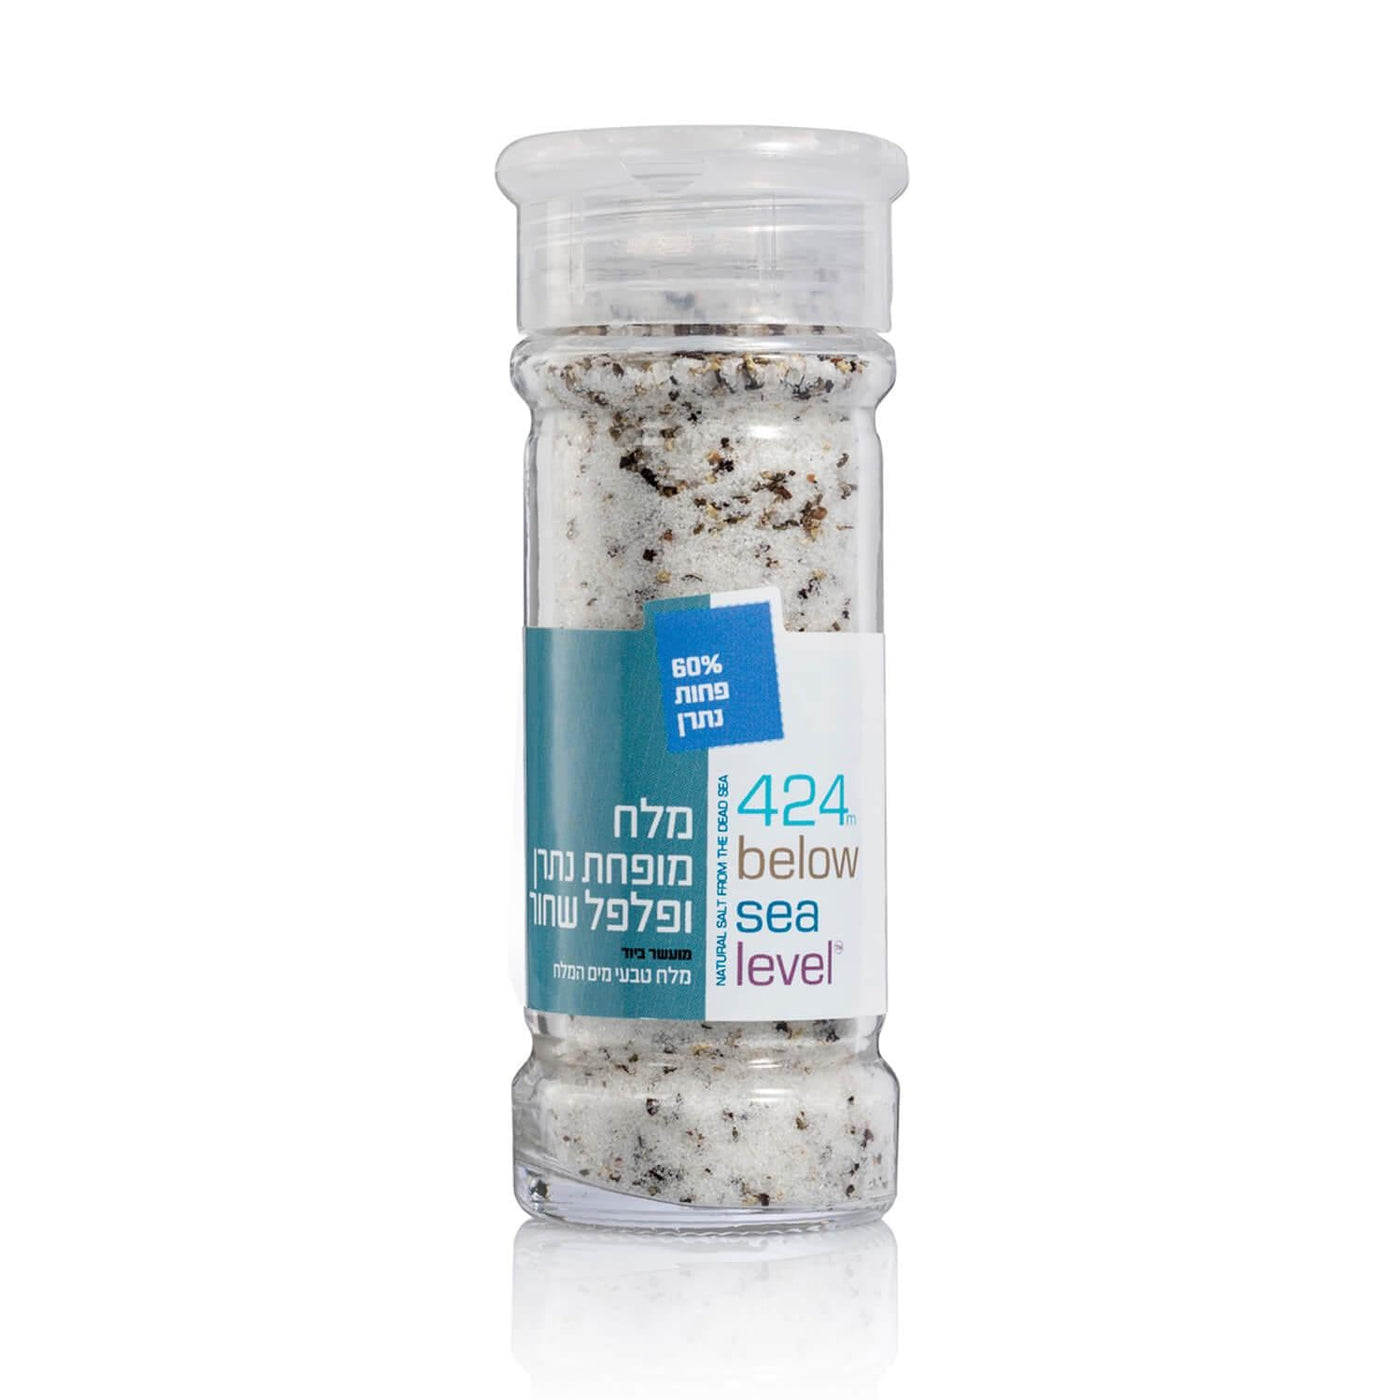 Low Sodium Salt Enriched With Fiber & Black Pepper from the Dead Sea - Spring Nahal